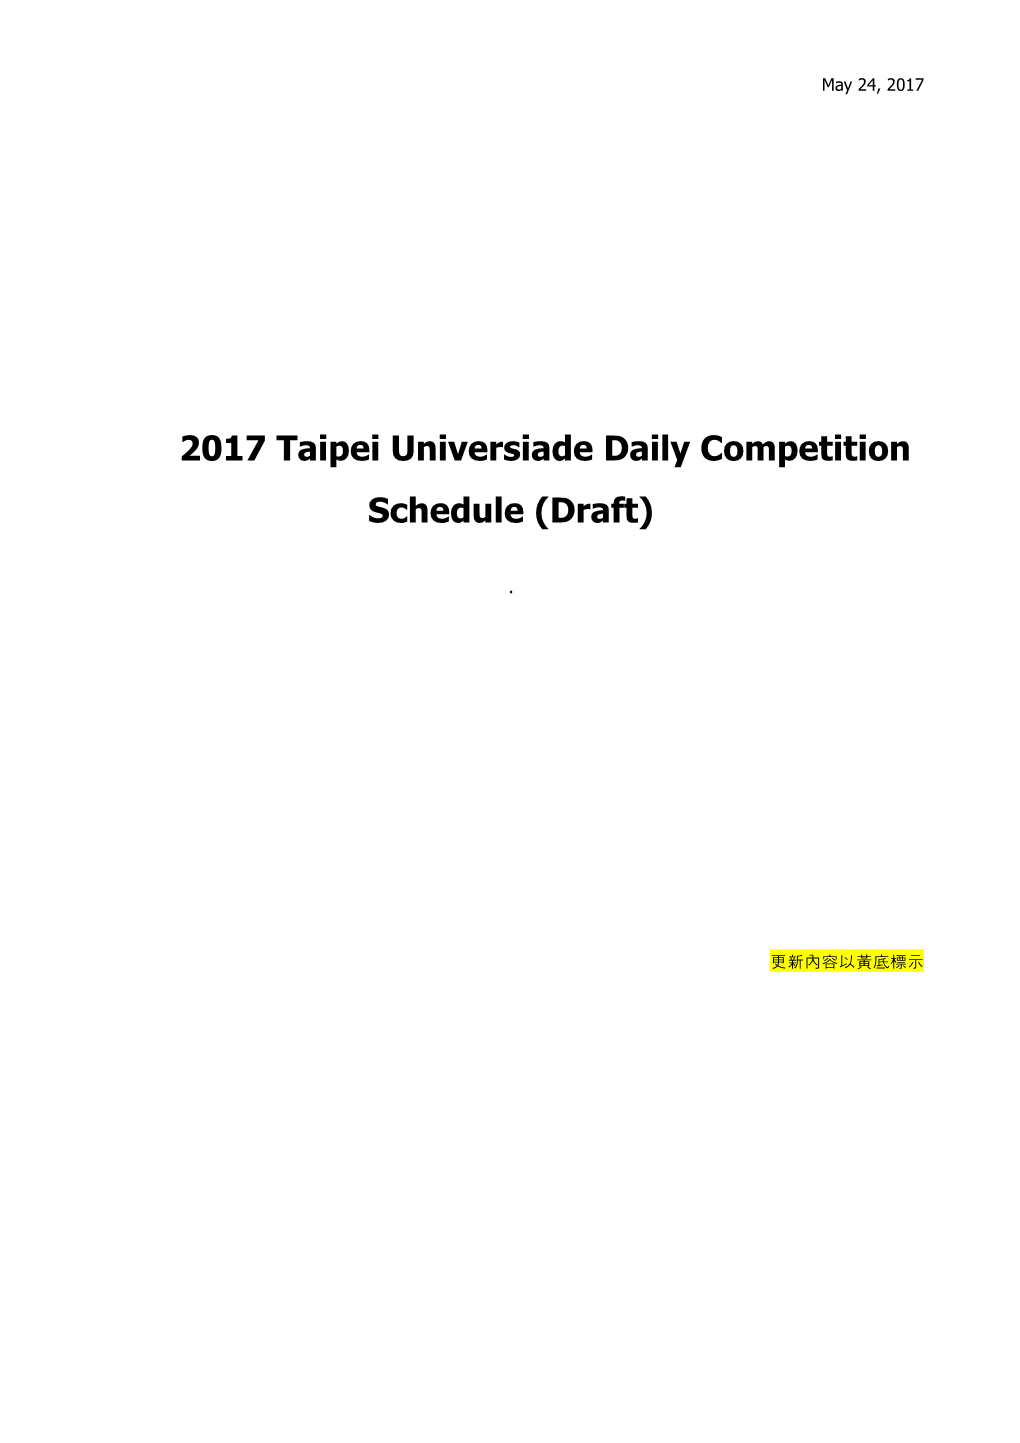 2017 Taipei Universiade Daily Competition Schedule (Draft)